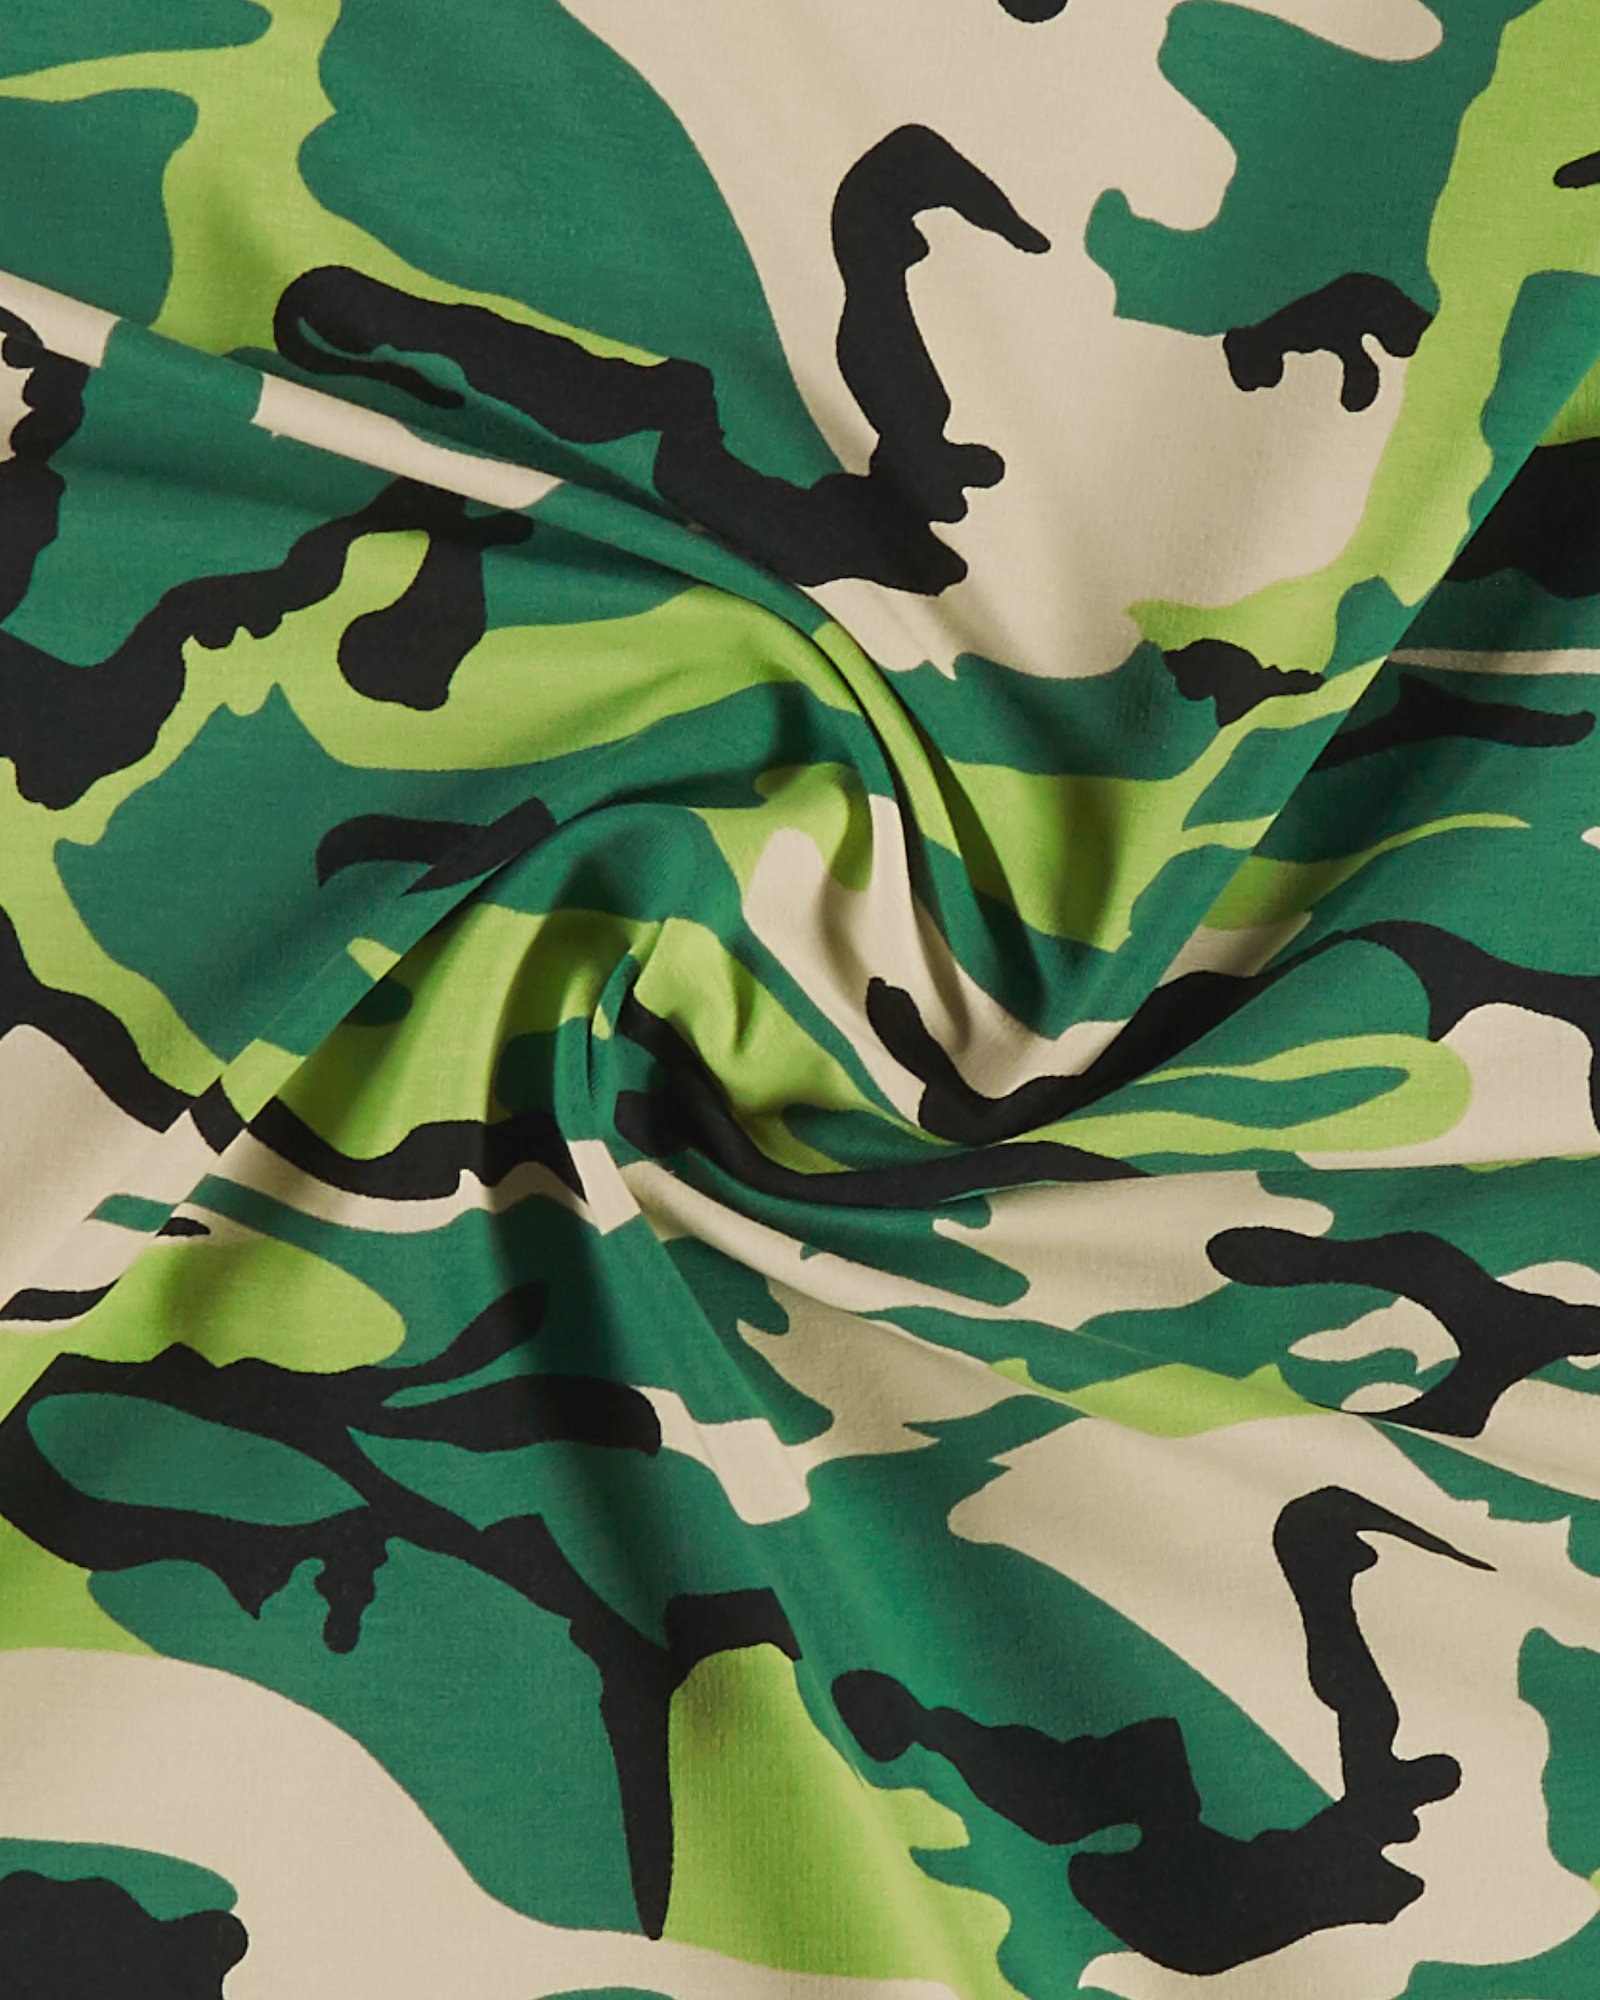 Sweat dunkelgrün m camouflage print ang 211938_pack